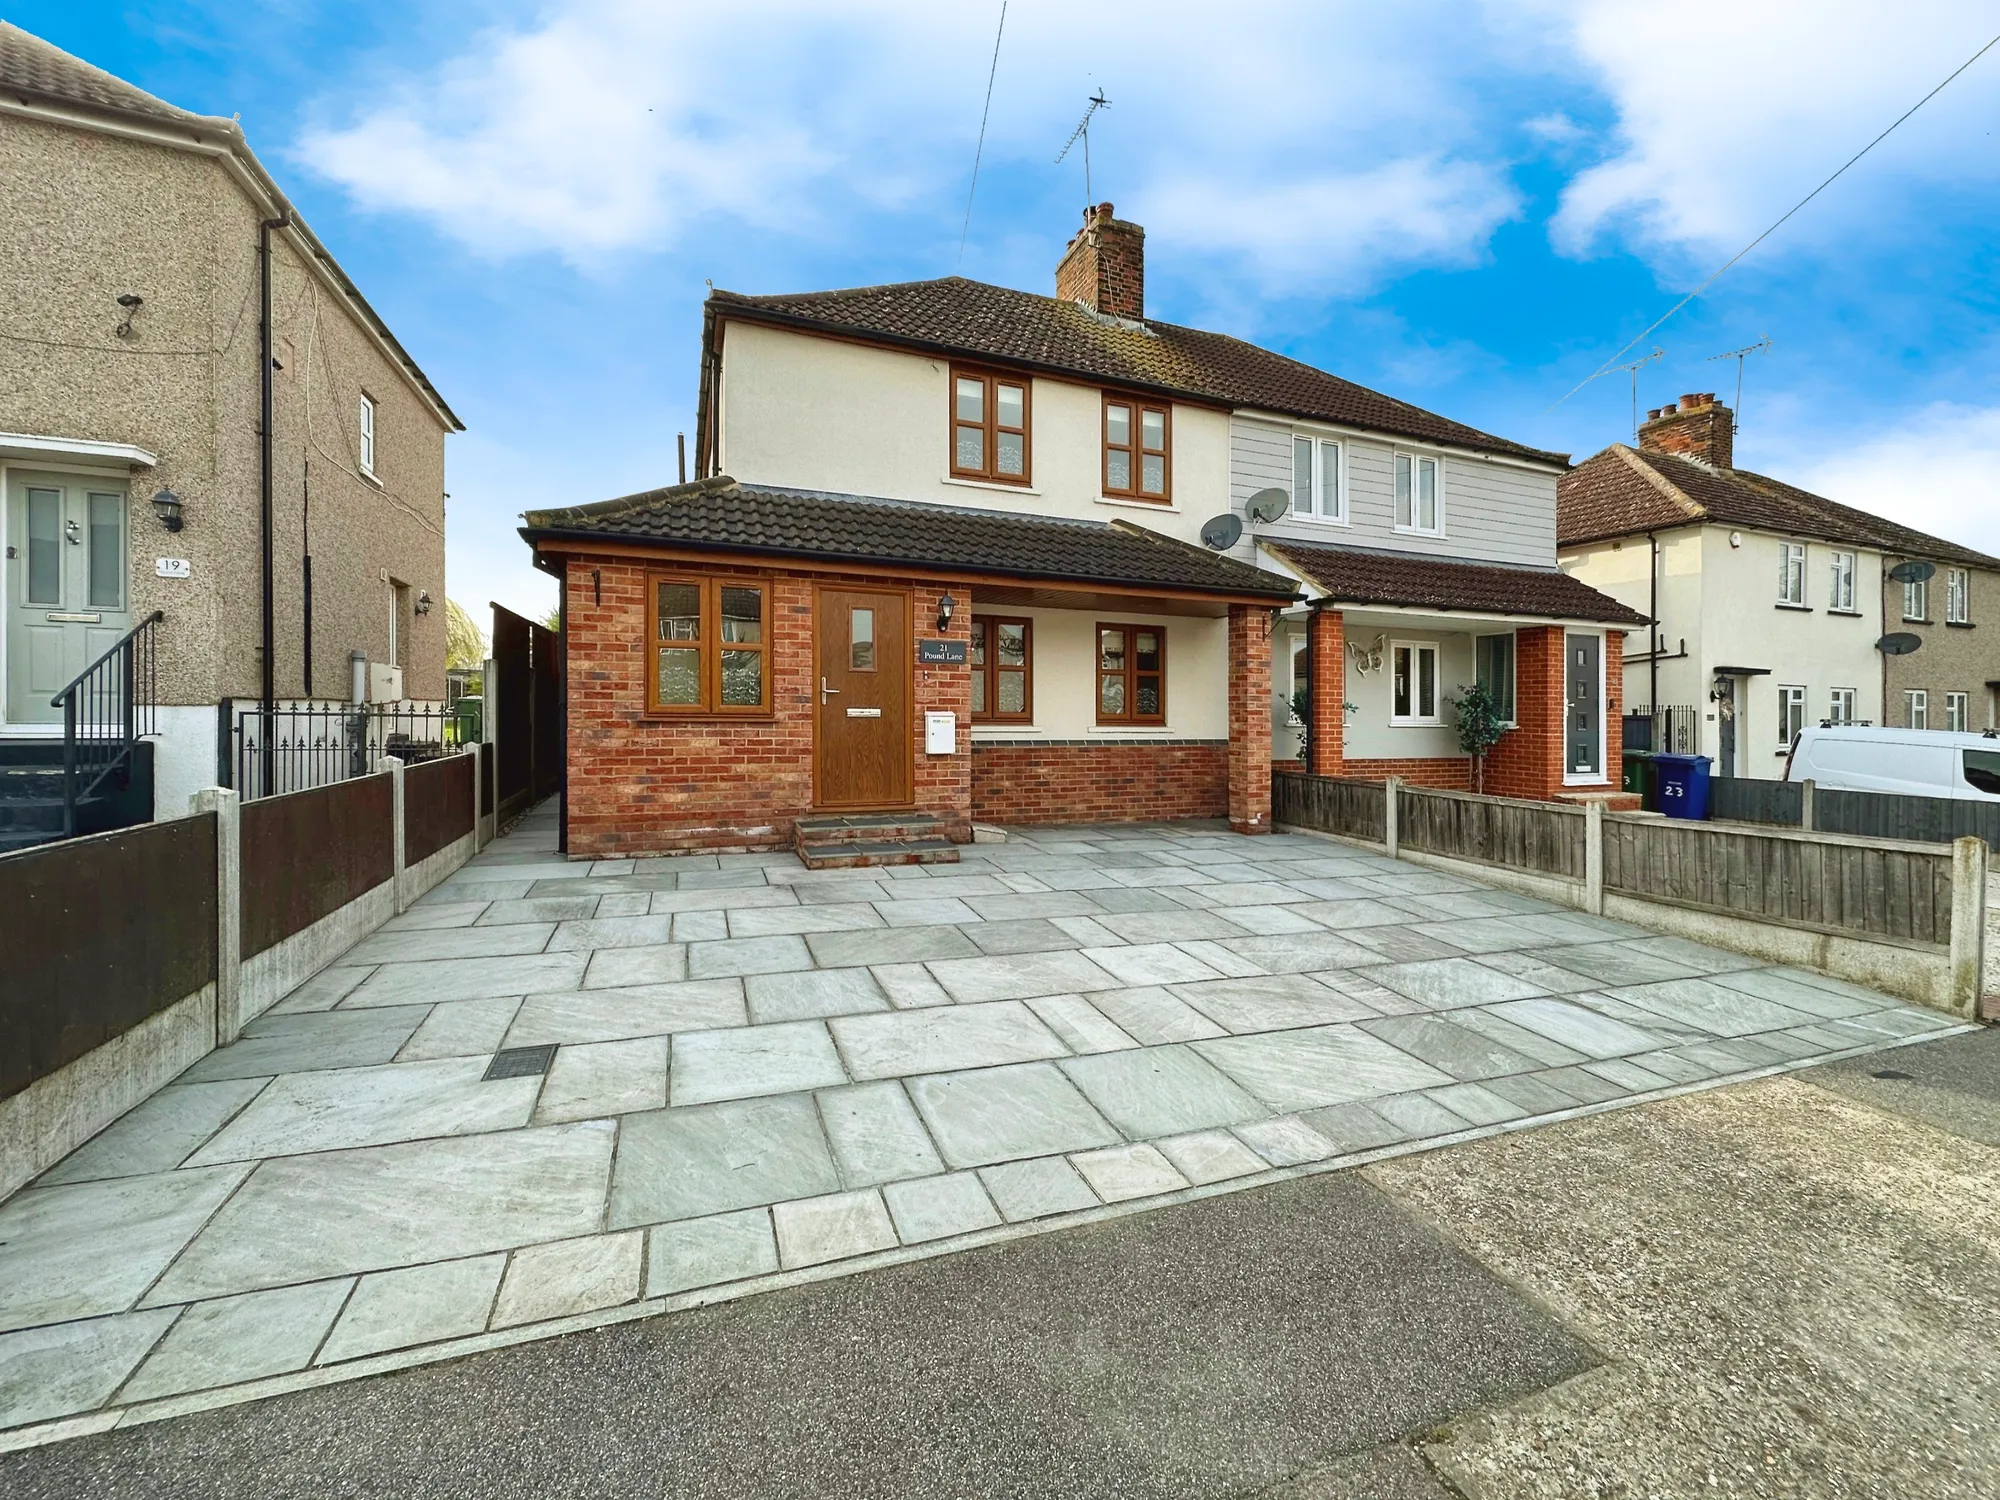 3 bed semi-detached house for sale in Pound Lane, Grays  - Property Image 1